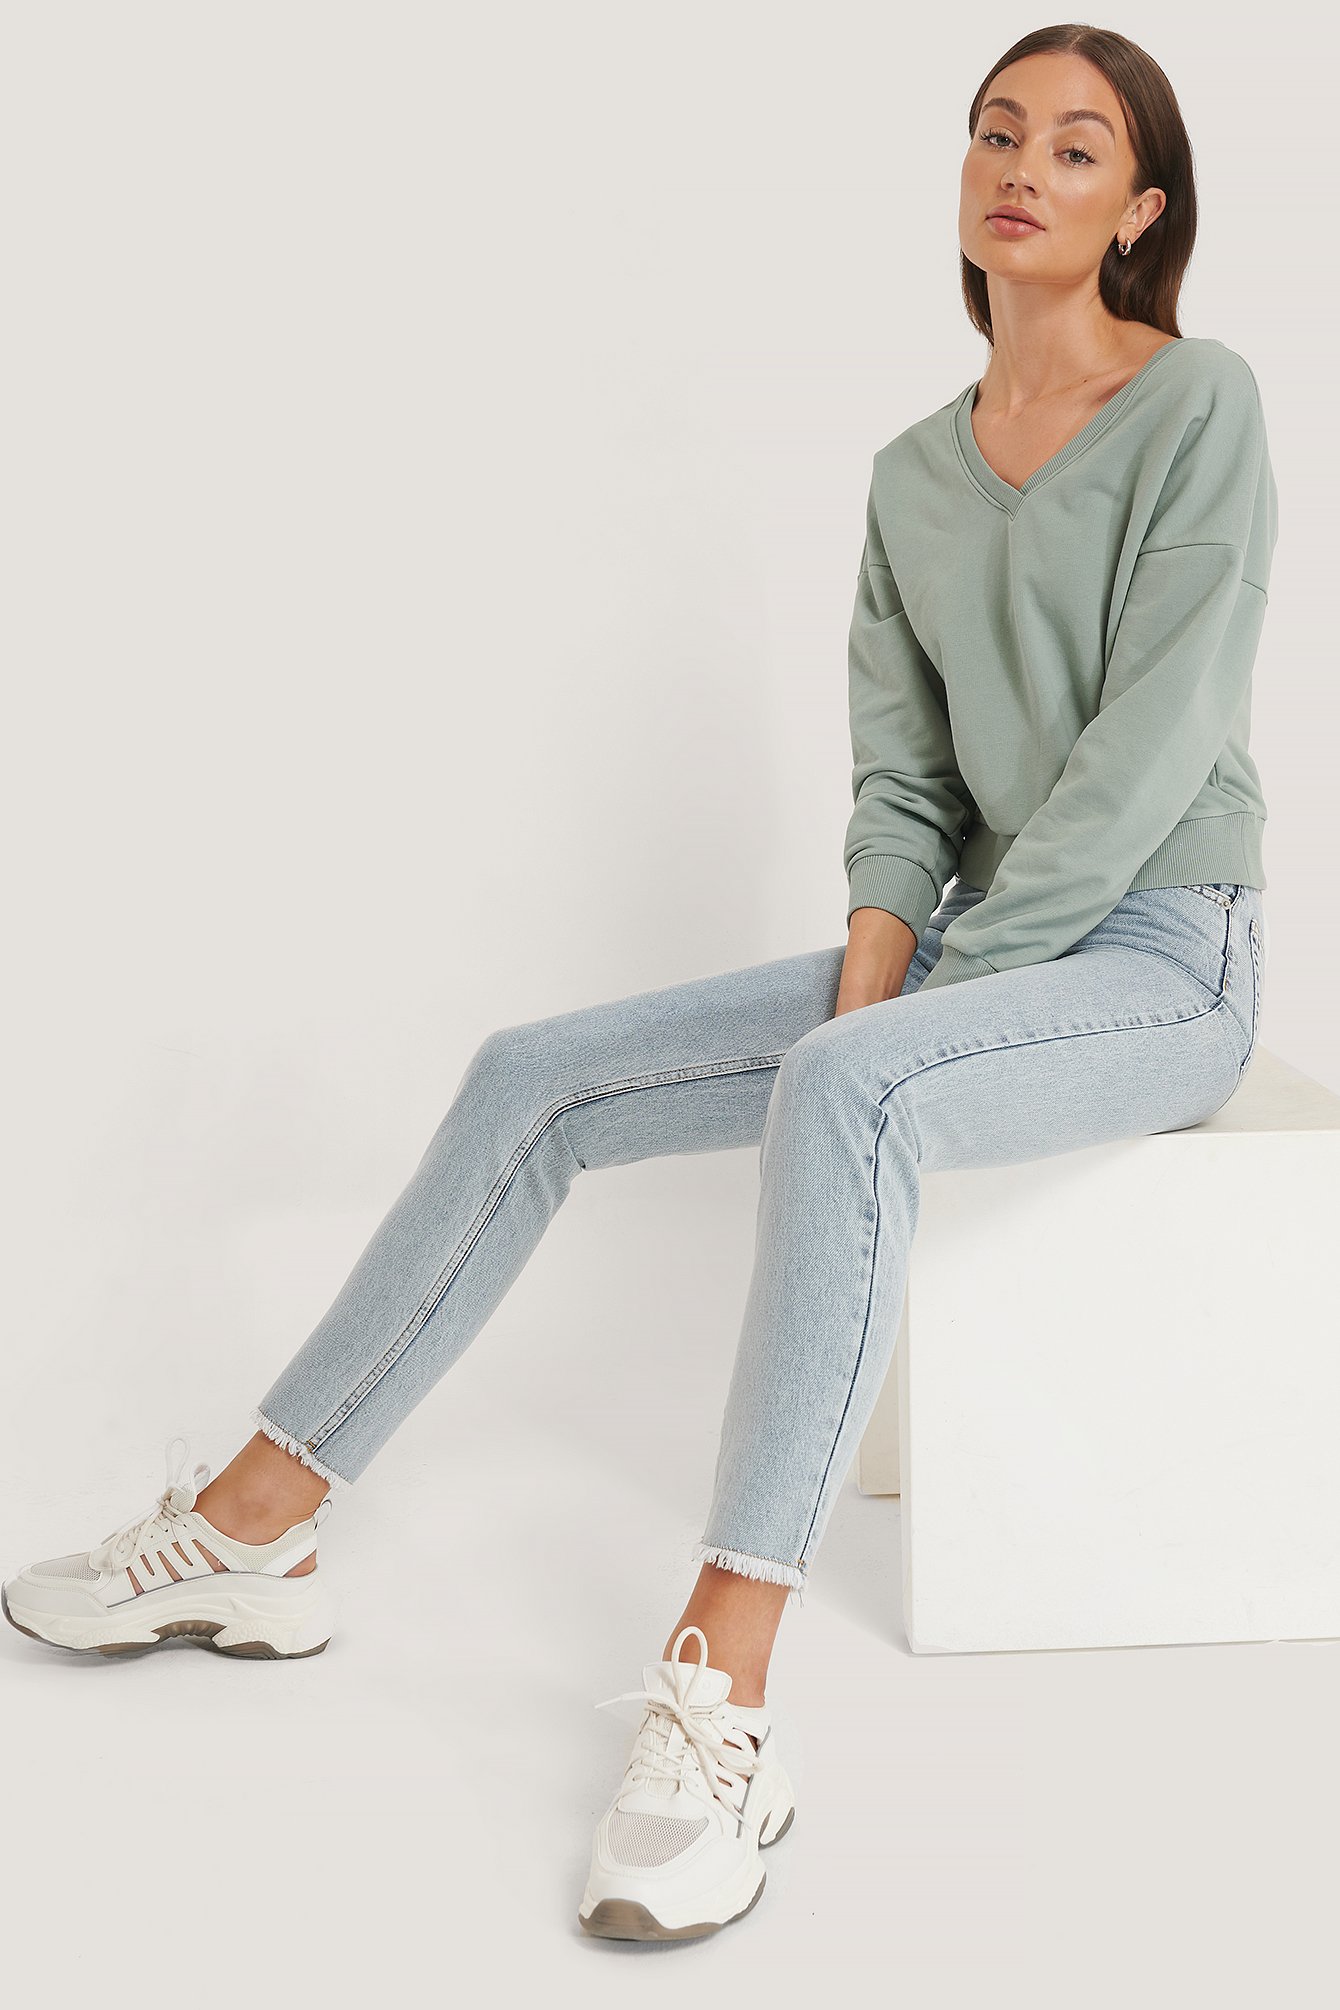 V-Neck Sweatshirt Outfit